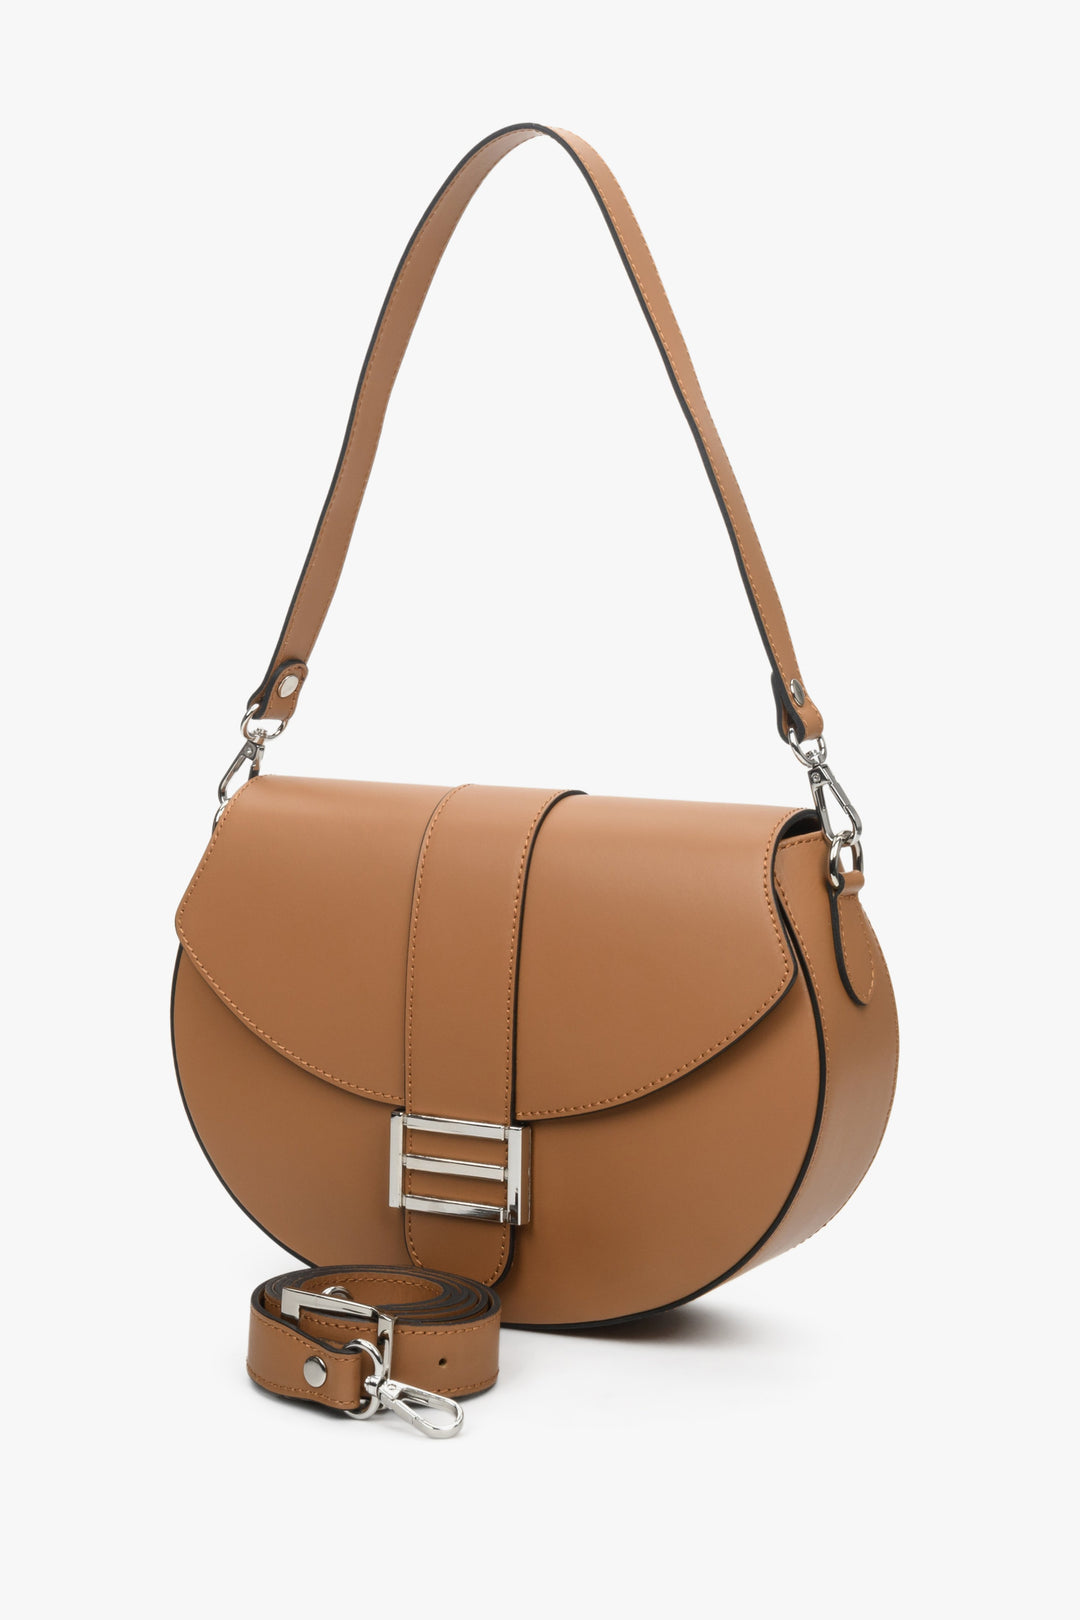 Leather, women's brown horseshoe-shaped handbag by Estro - presentation of the model with a short shoulder strap.